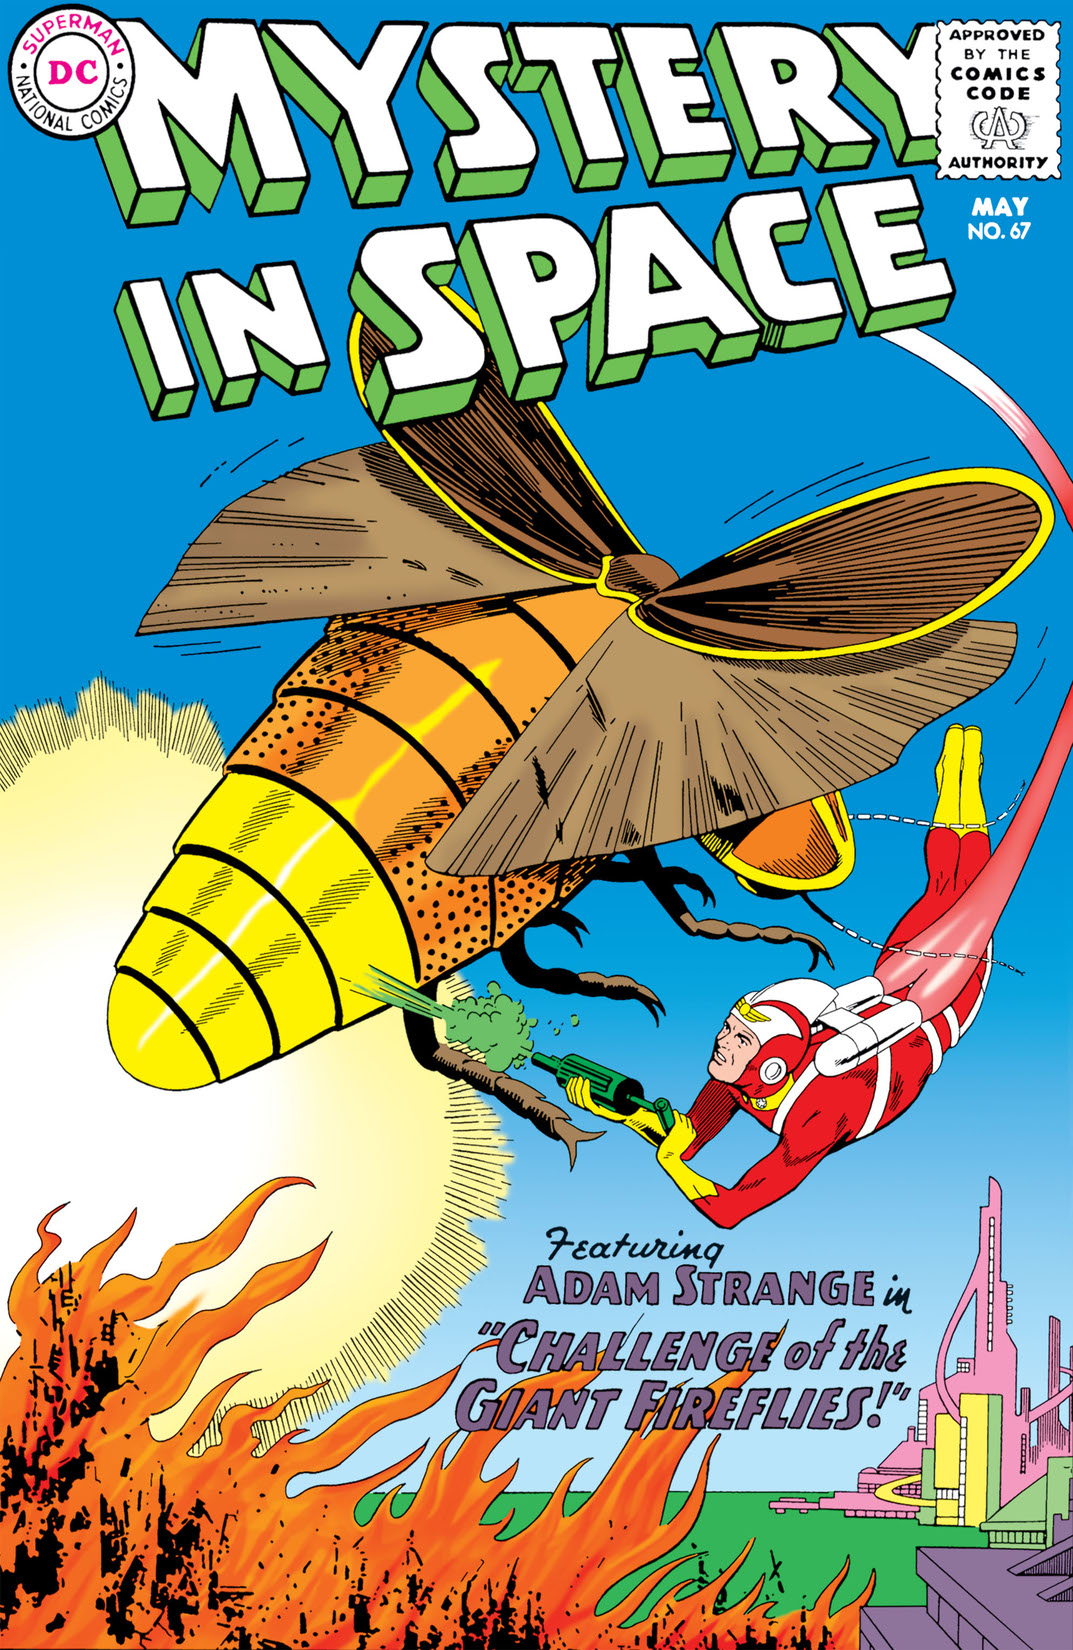 Mystery in Space (1951-) #67 preview images